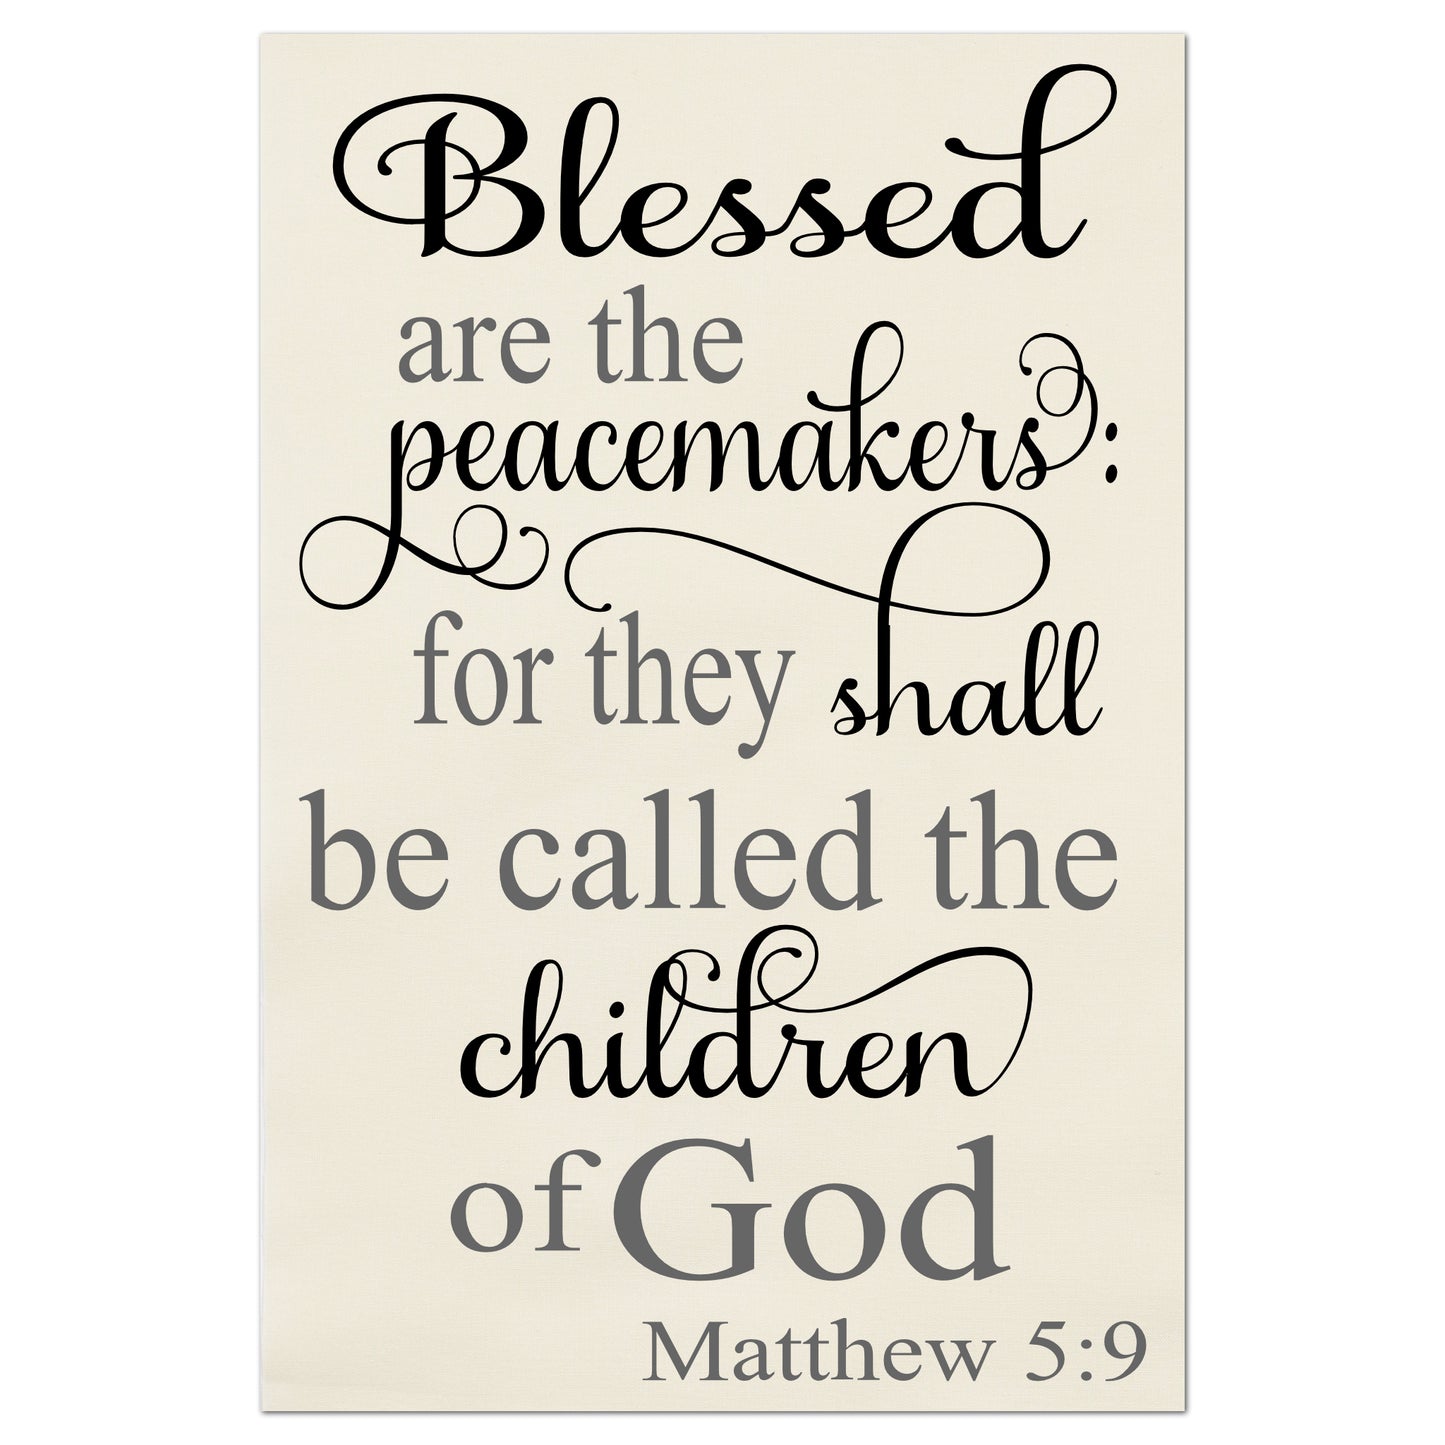 Blessed are the peacemakers:  for they shall be called the children of God.  - Matthew 5 9, Scripture Fabric, Quilt Block, Religious Fabric